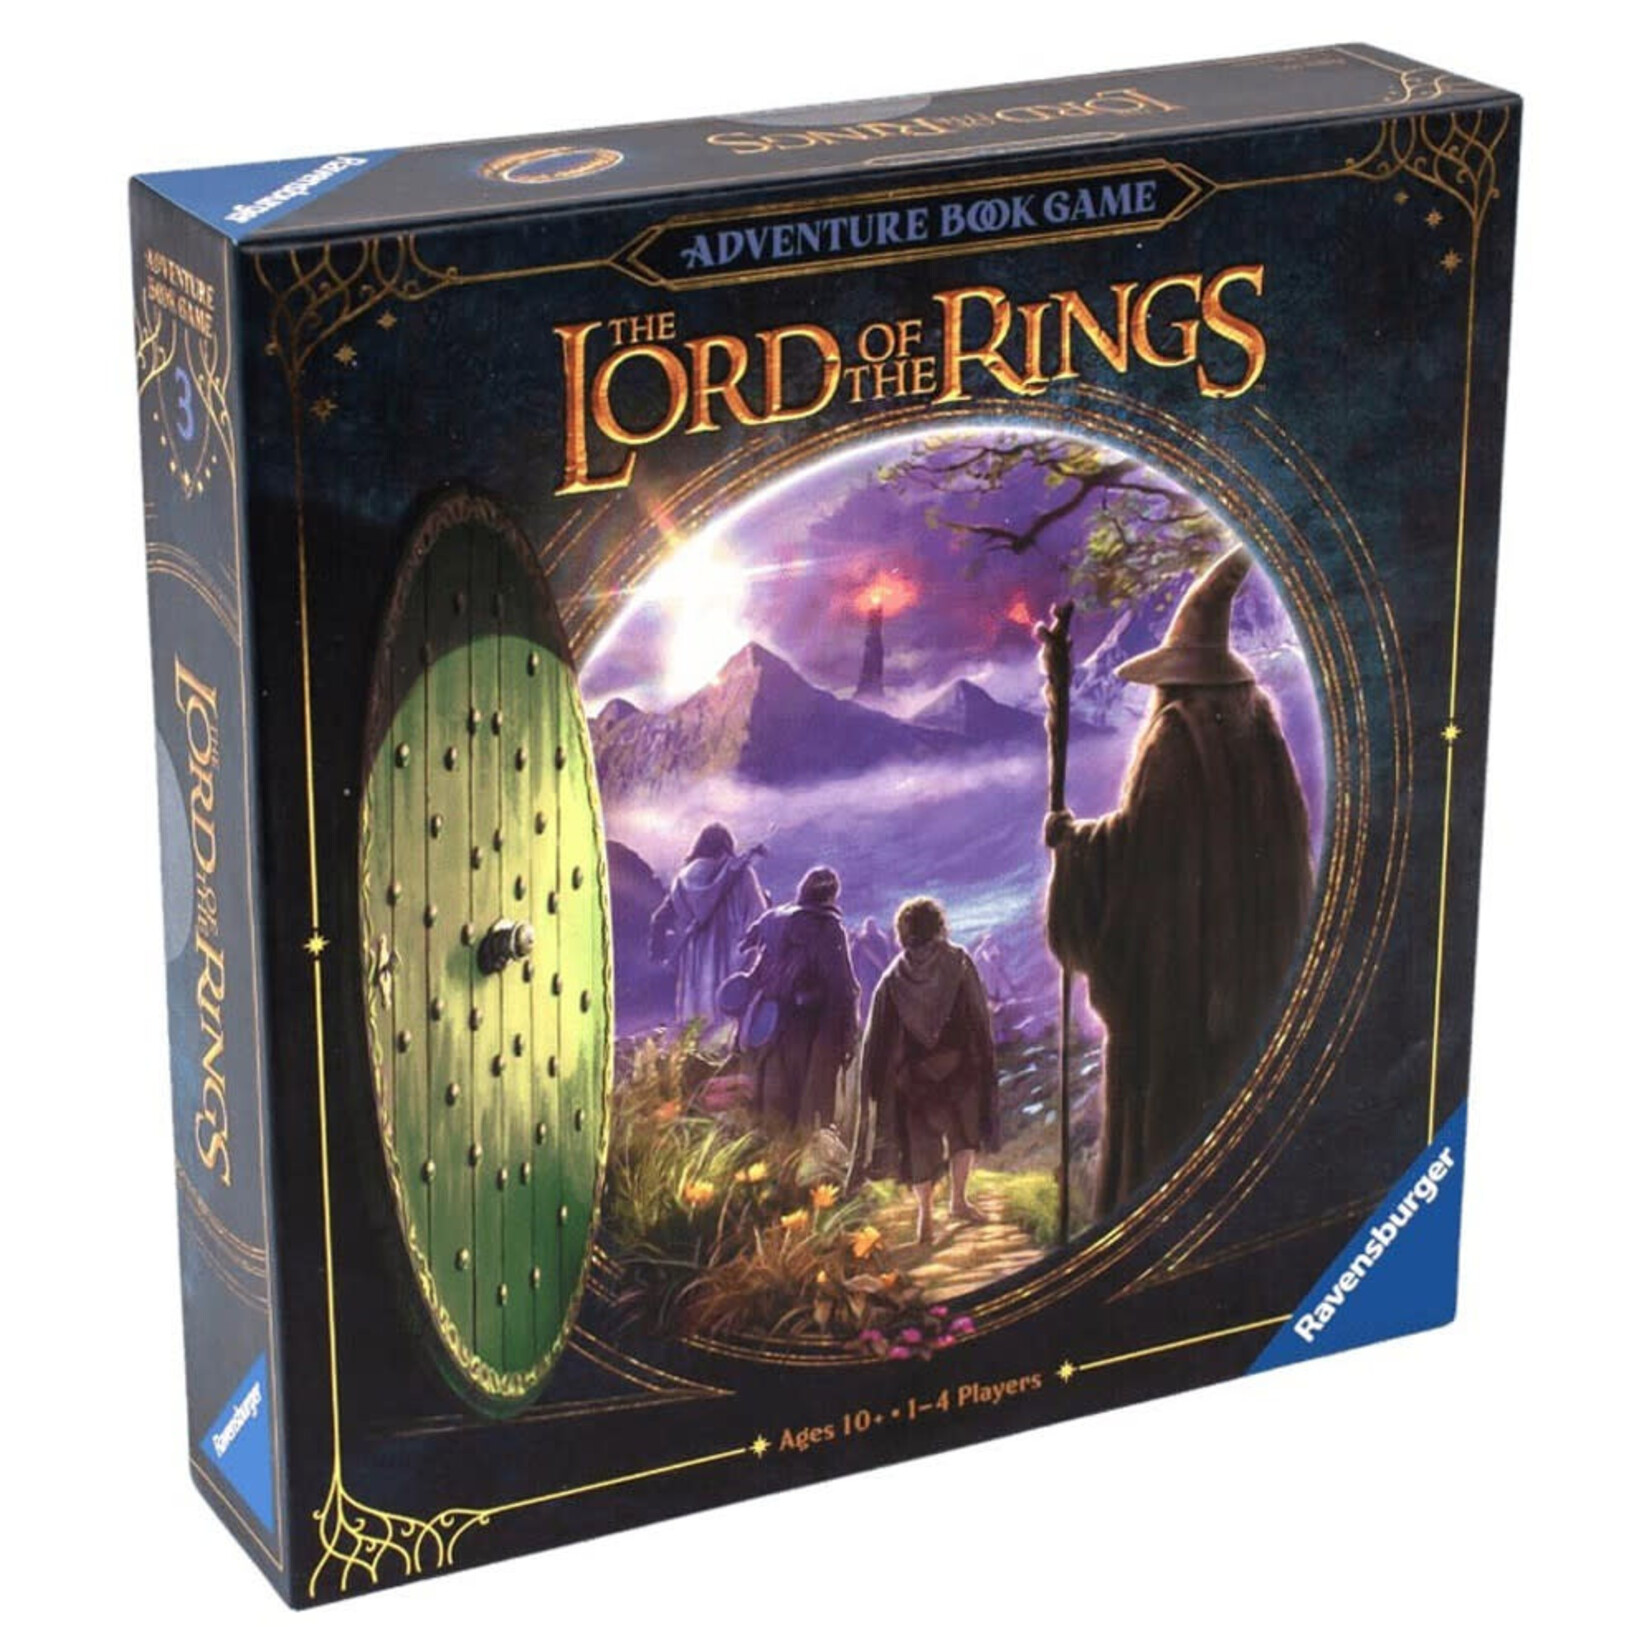 Ravensburger Lord of the Rings, The: Adventure Book Game